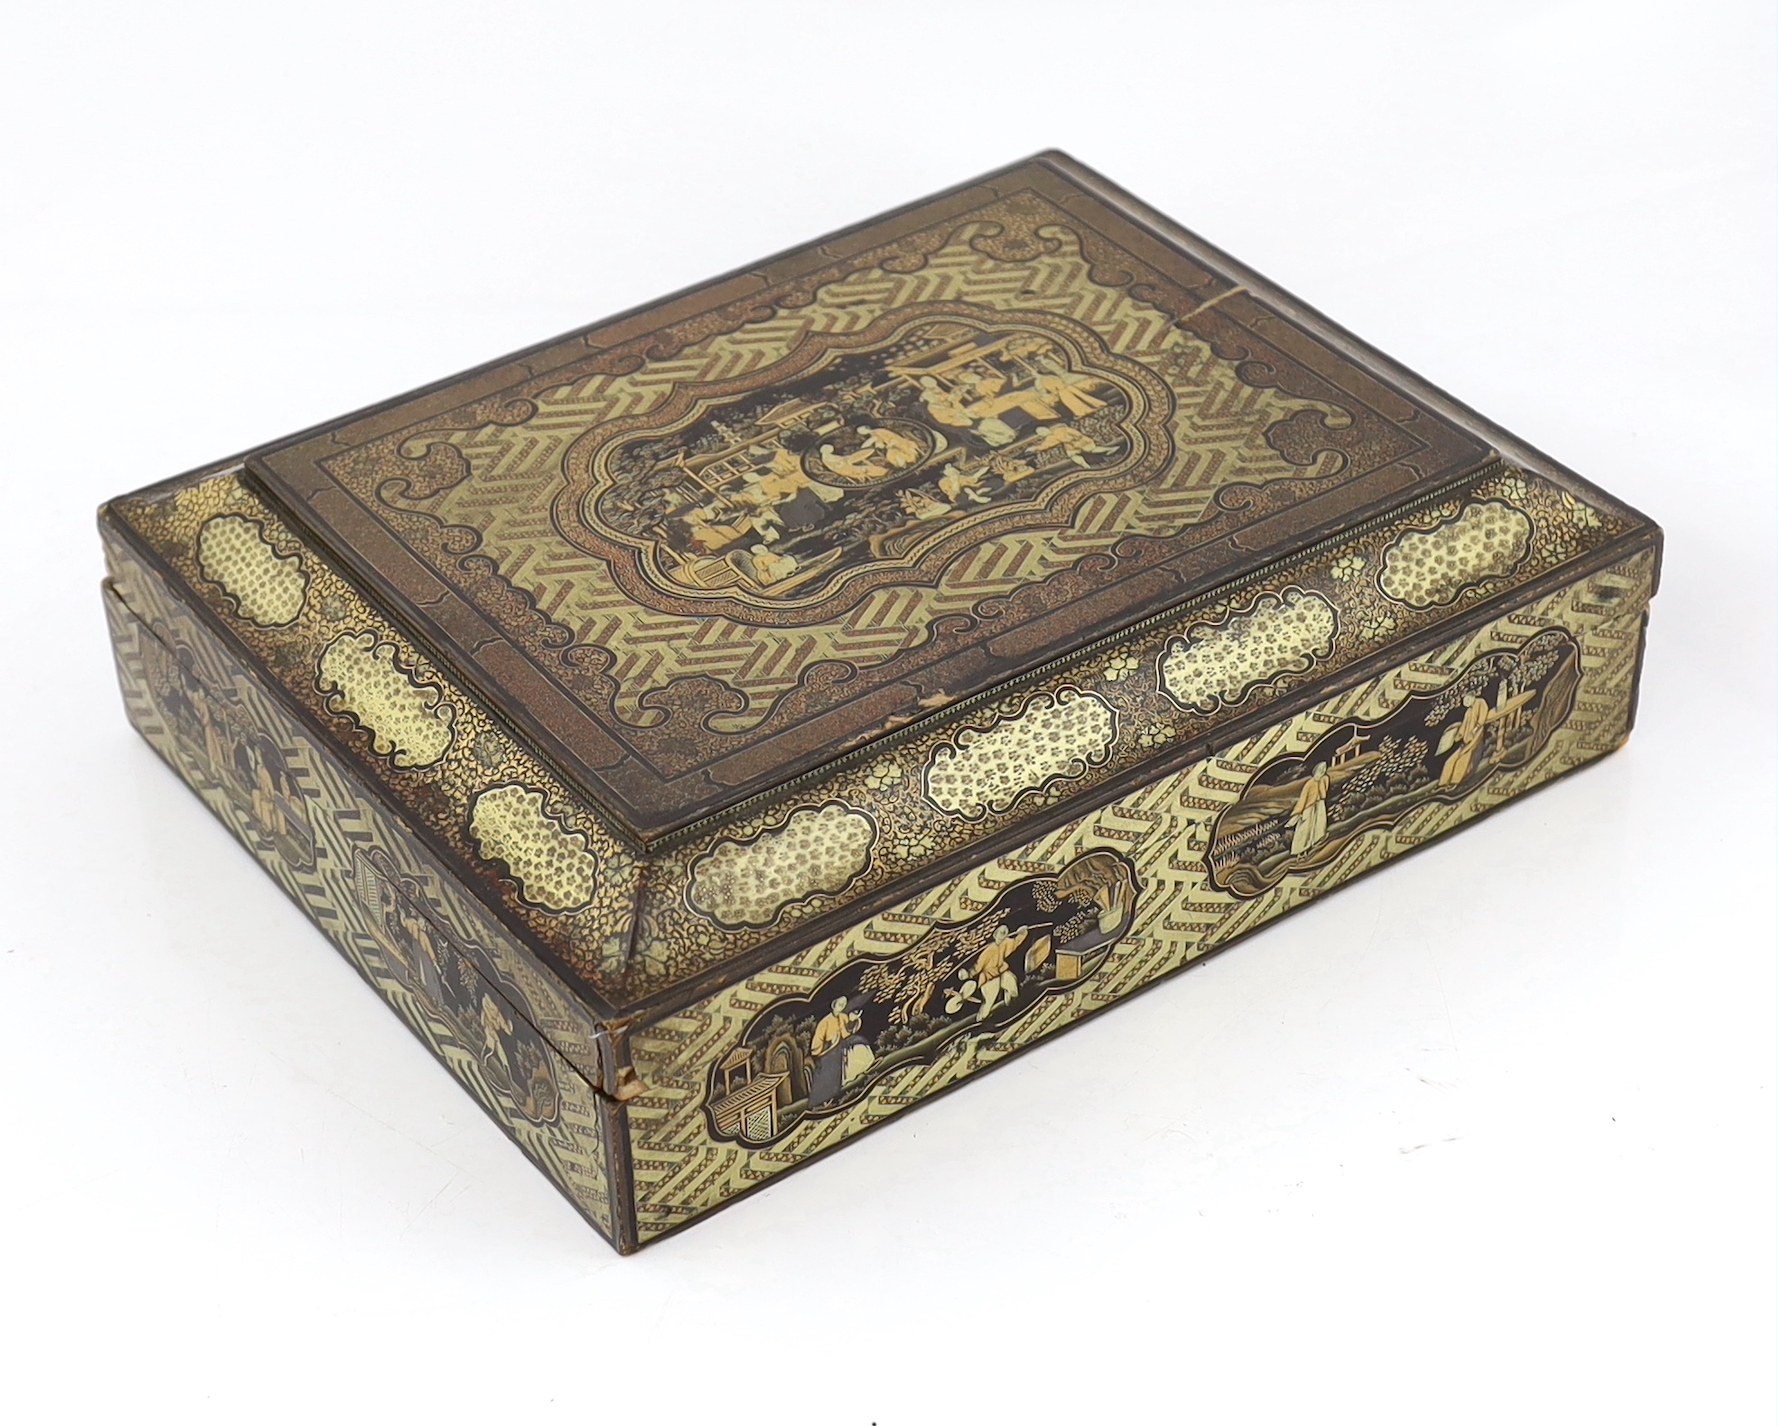 A Chinese gilt-decorated black lacquer games box, mid 19th century